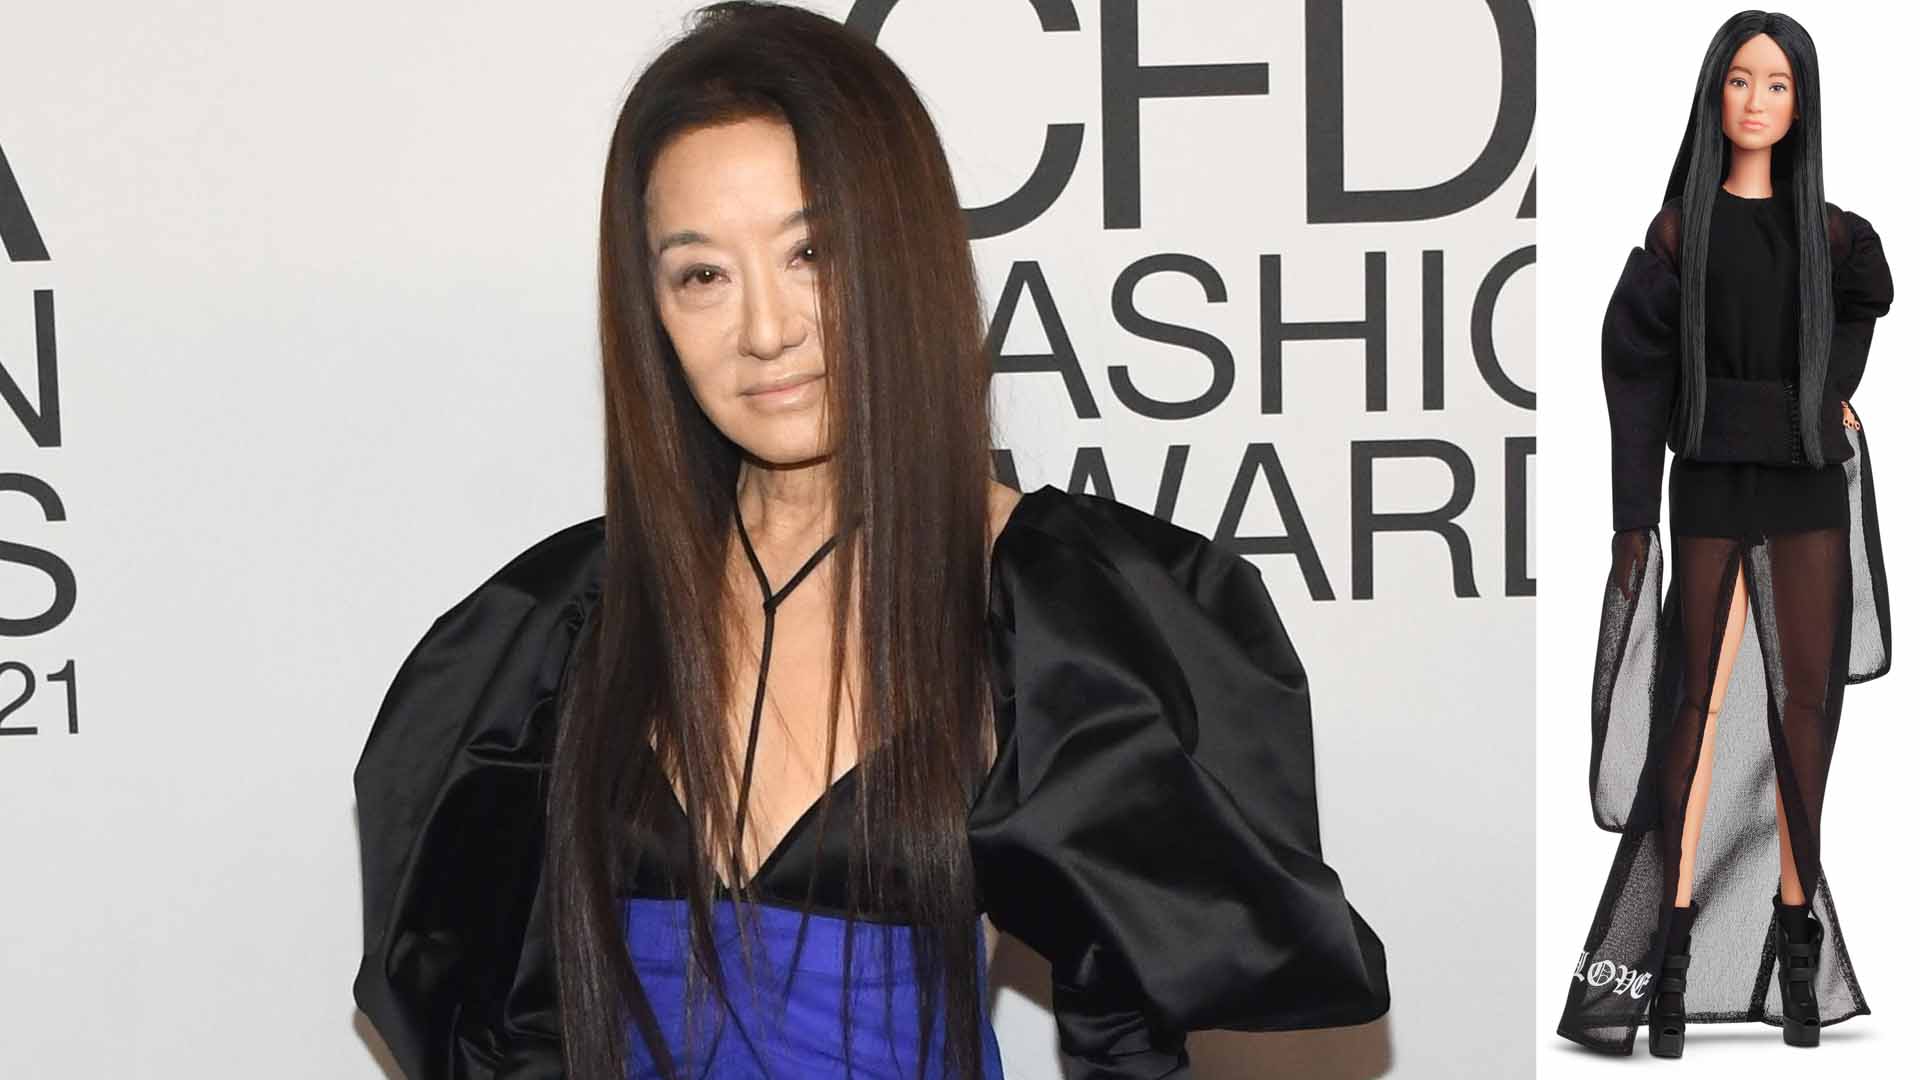 Fashion Designer Vera Wang Reacts To Her Barbie Tribute Doll: "This Is Such An Insane Honour"